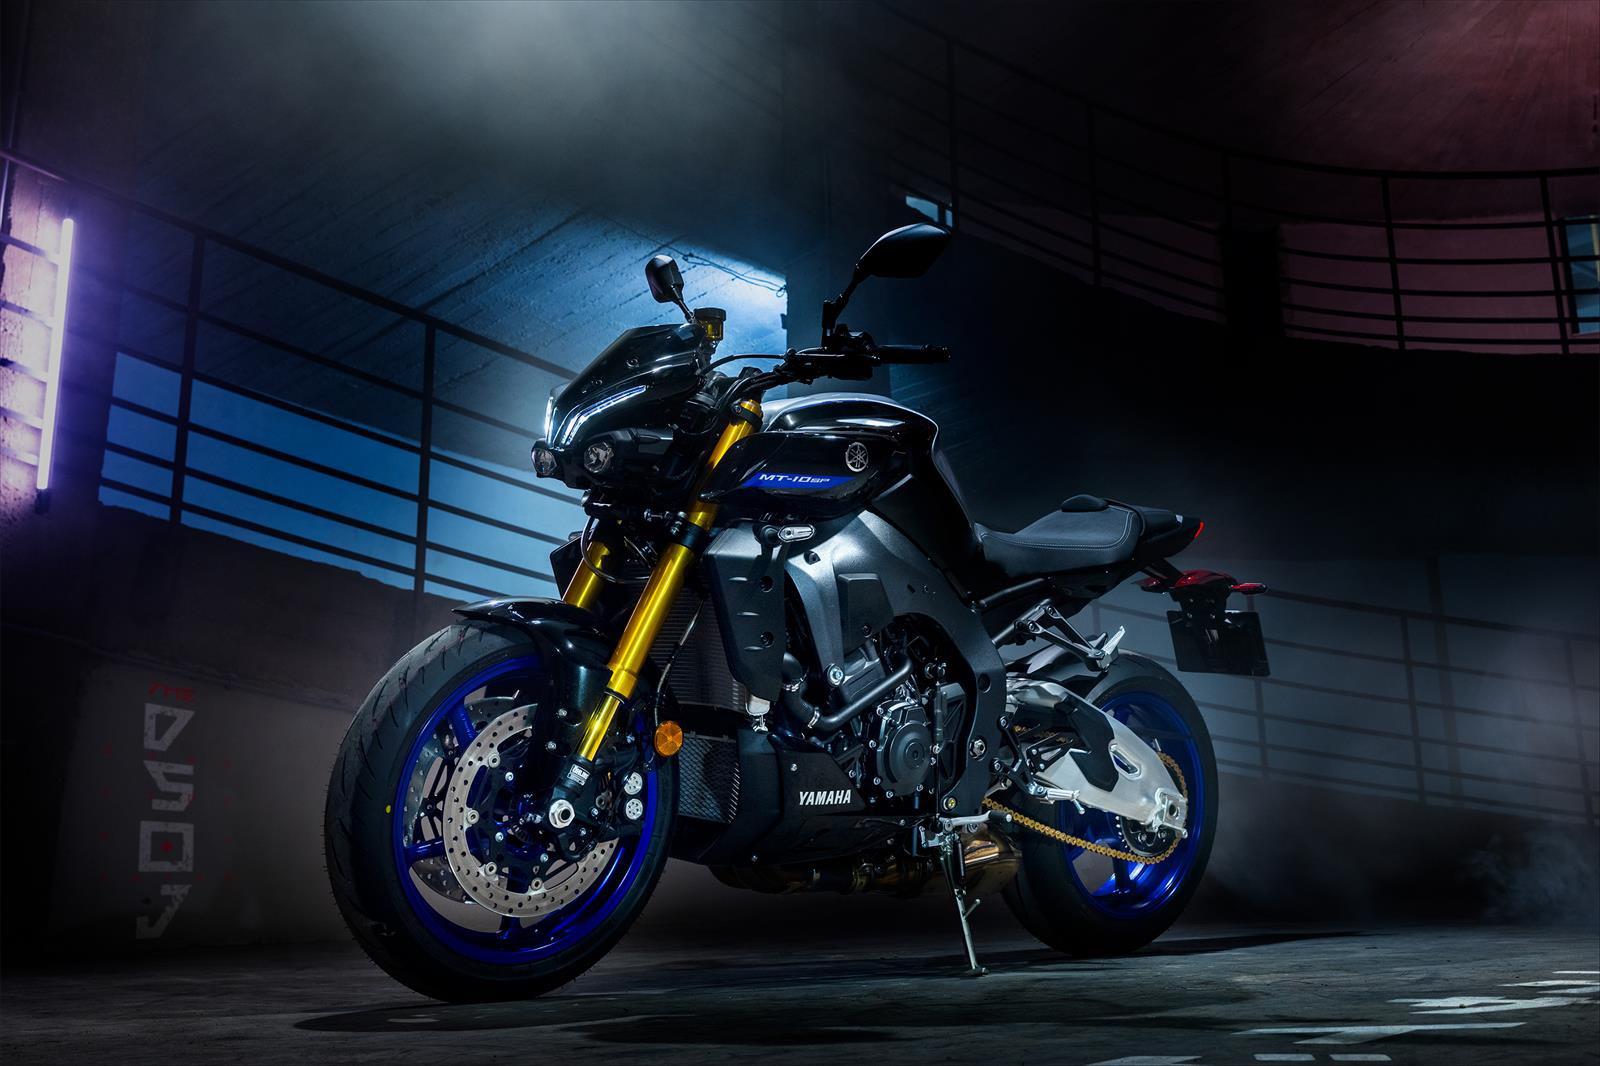 Yamaha 2022 MT-10 SP motorcycle in a Japanese car park at night